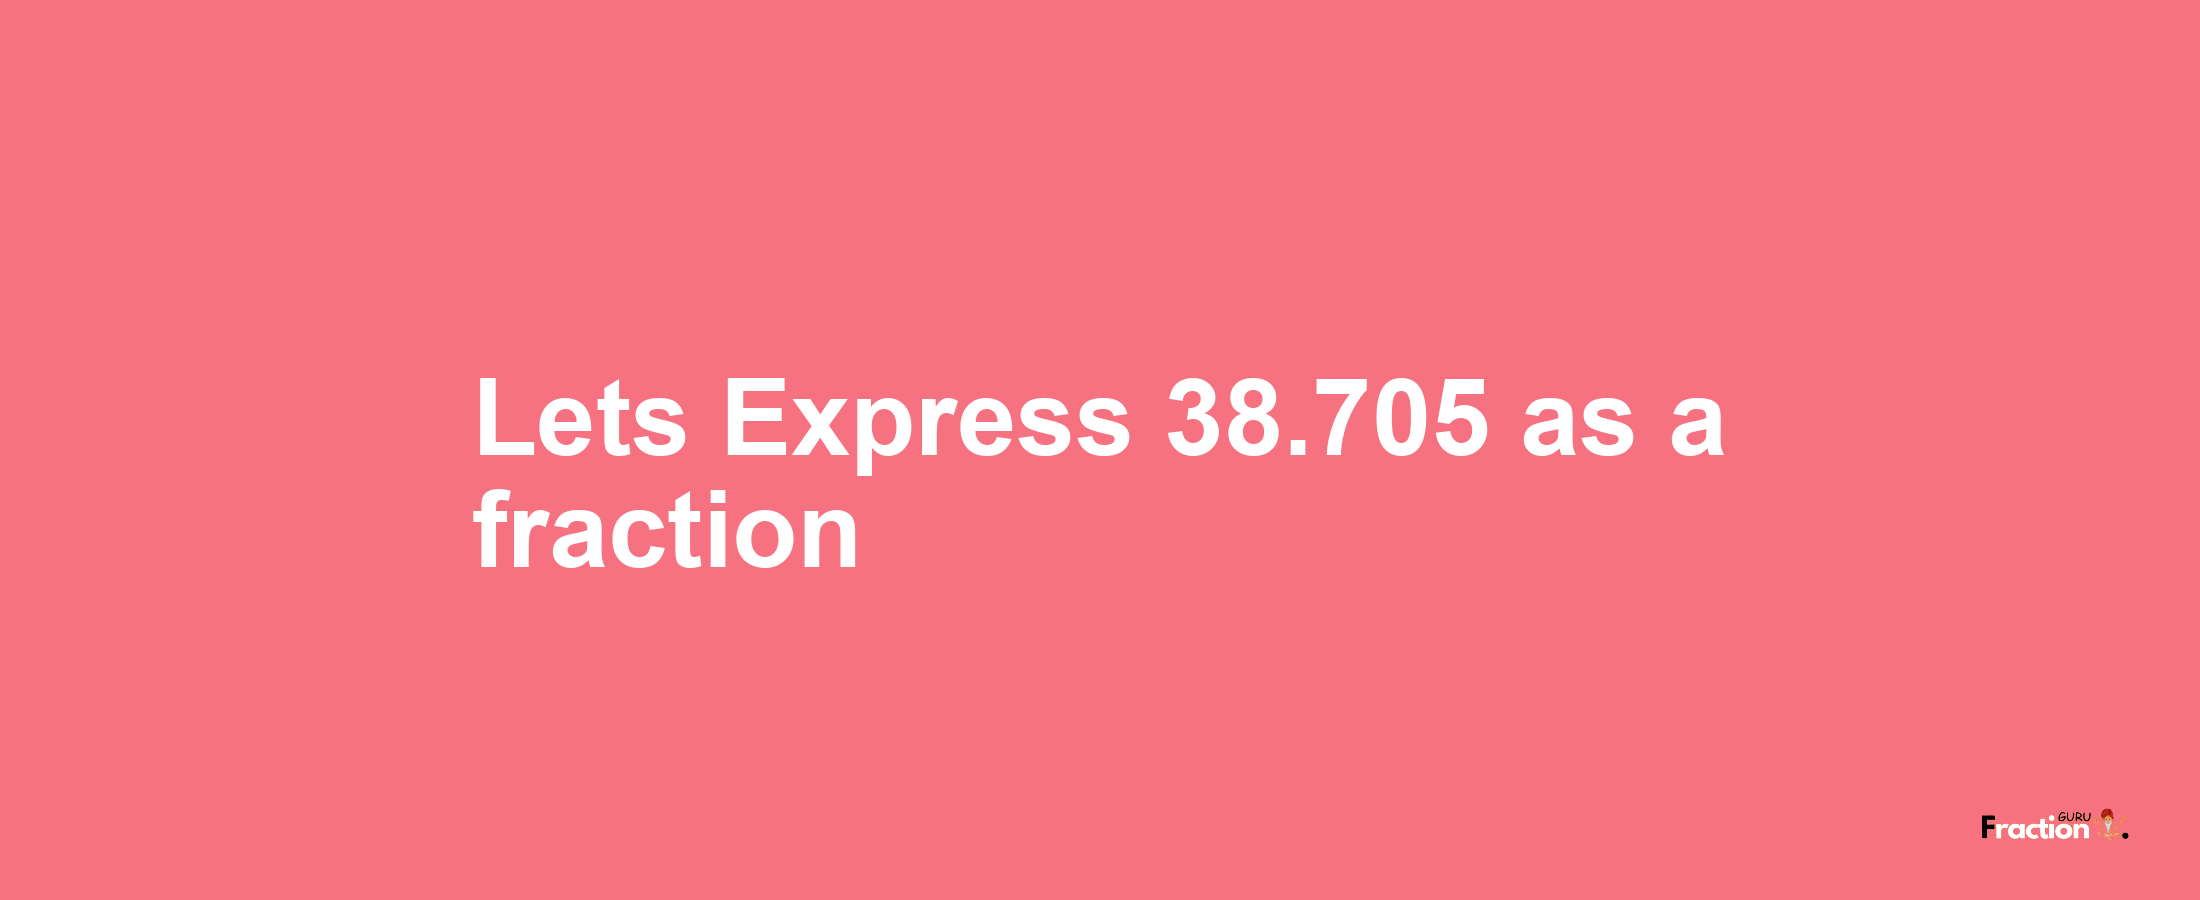 Lets Express 38.705 as afraction